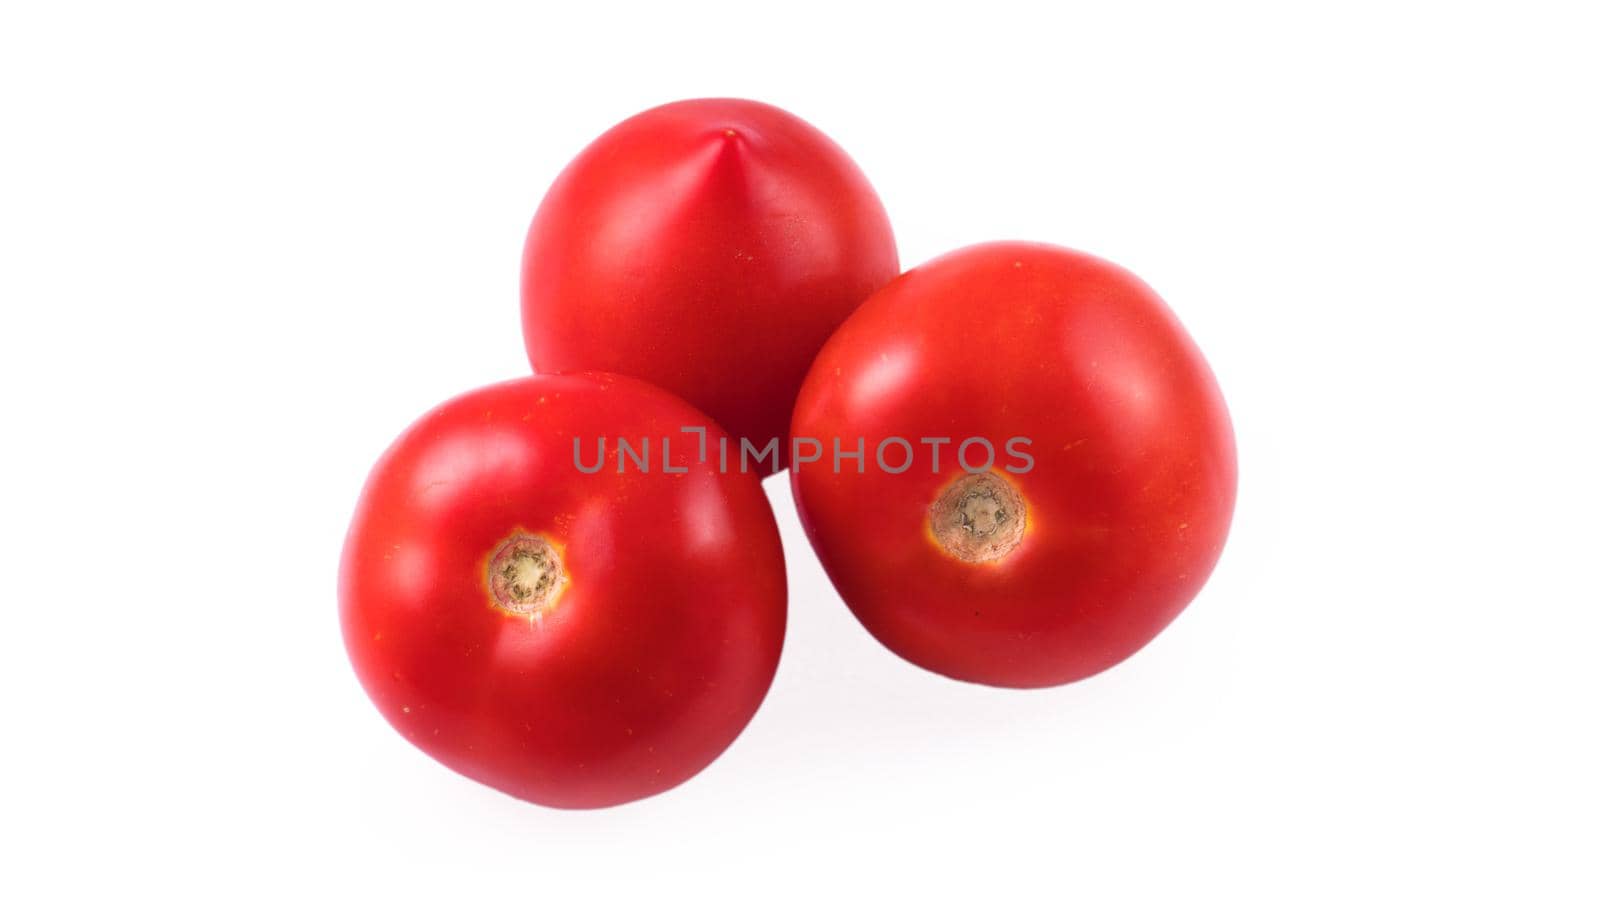 Three whole red tomatoes on a white background in isolation